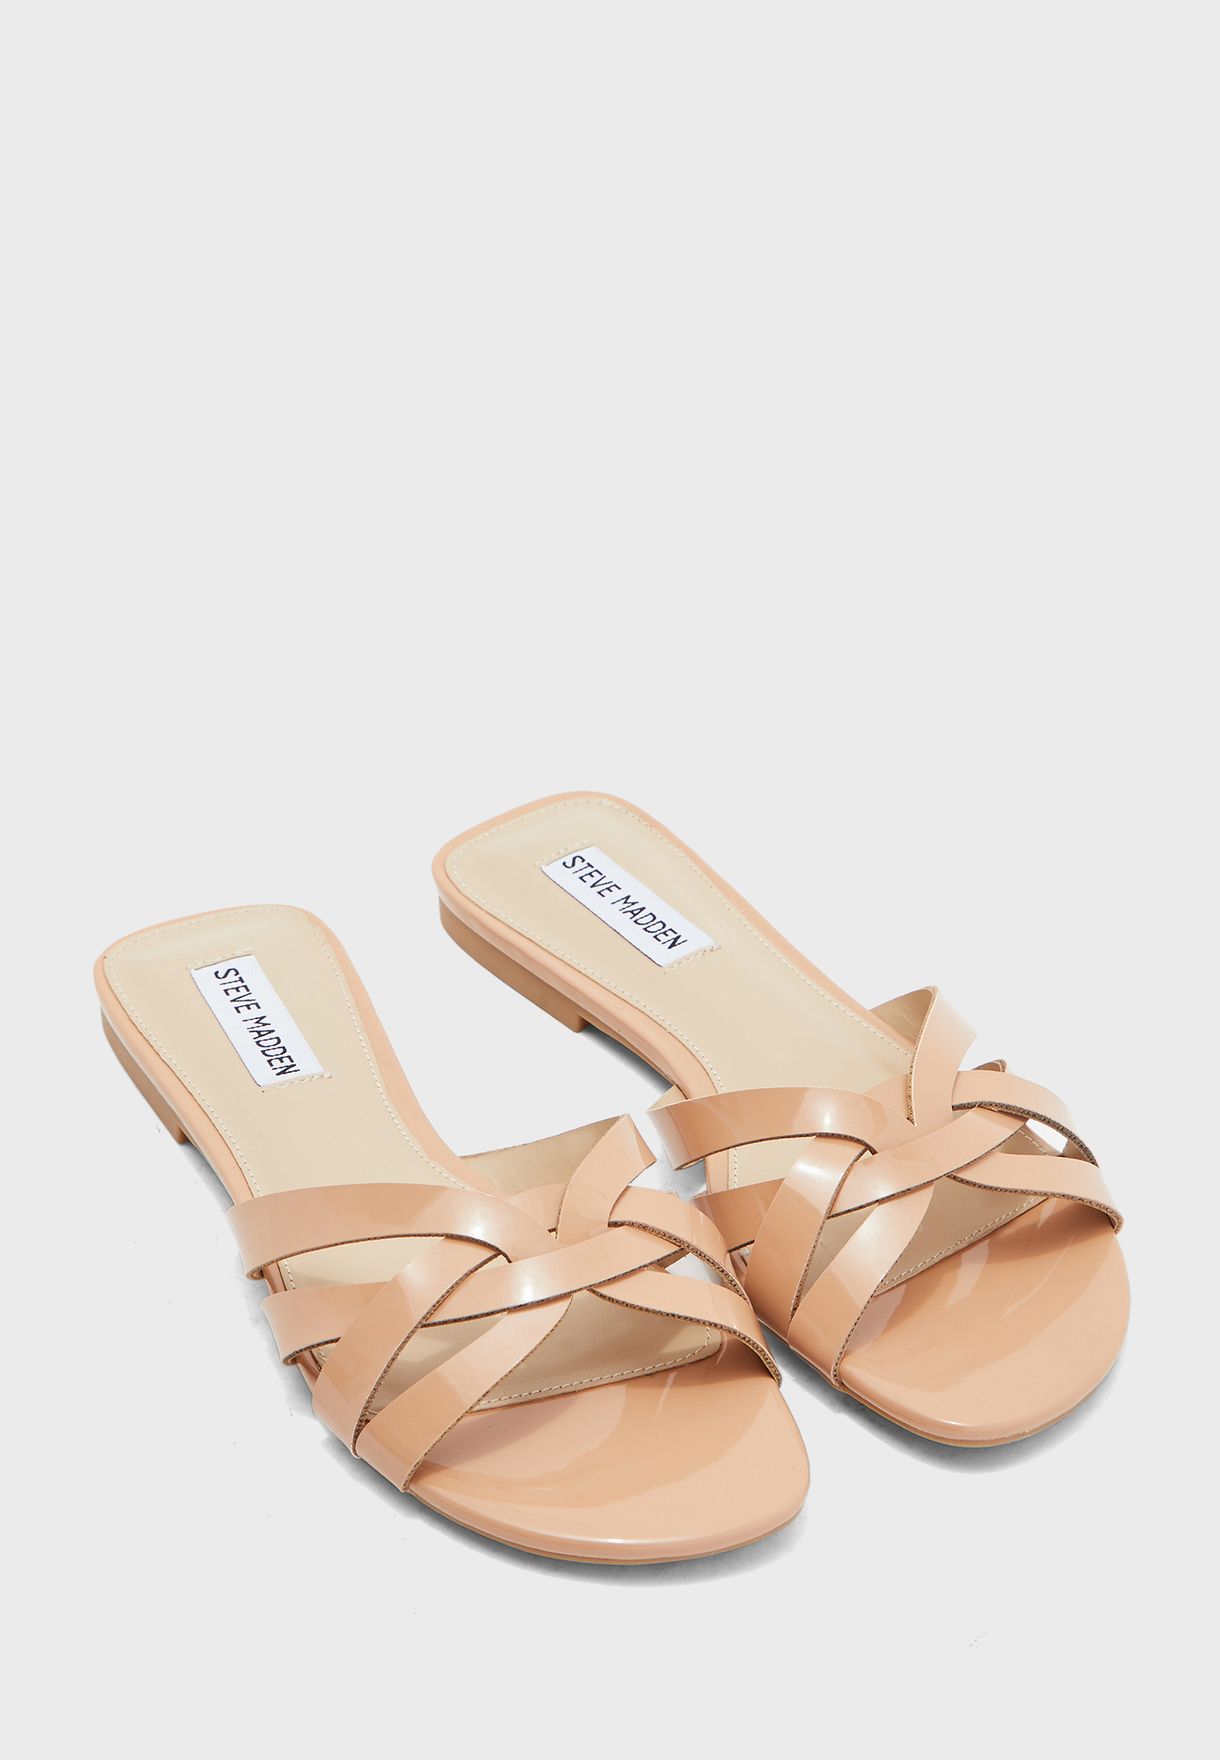 tan sandals with small heel